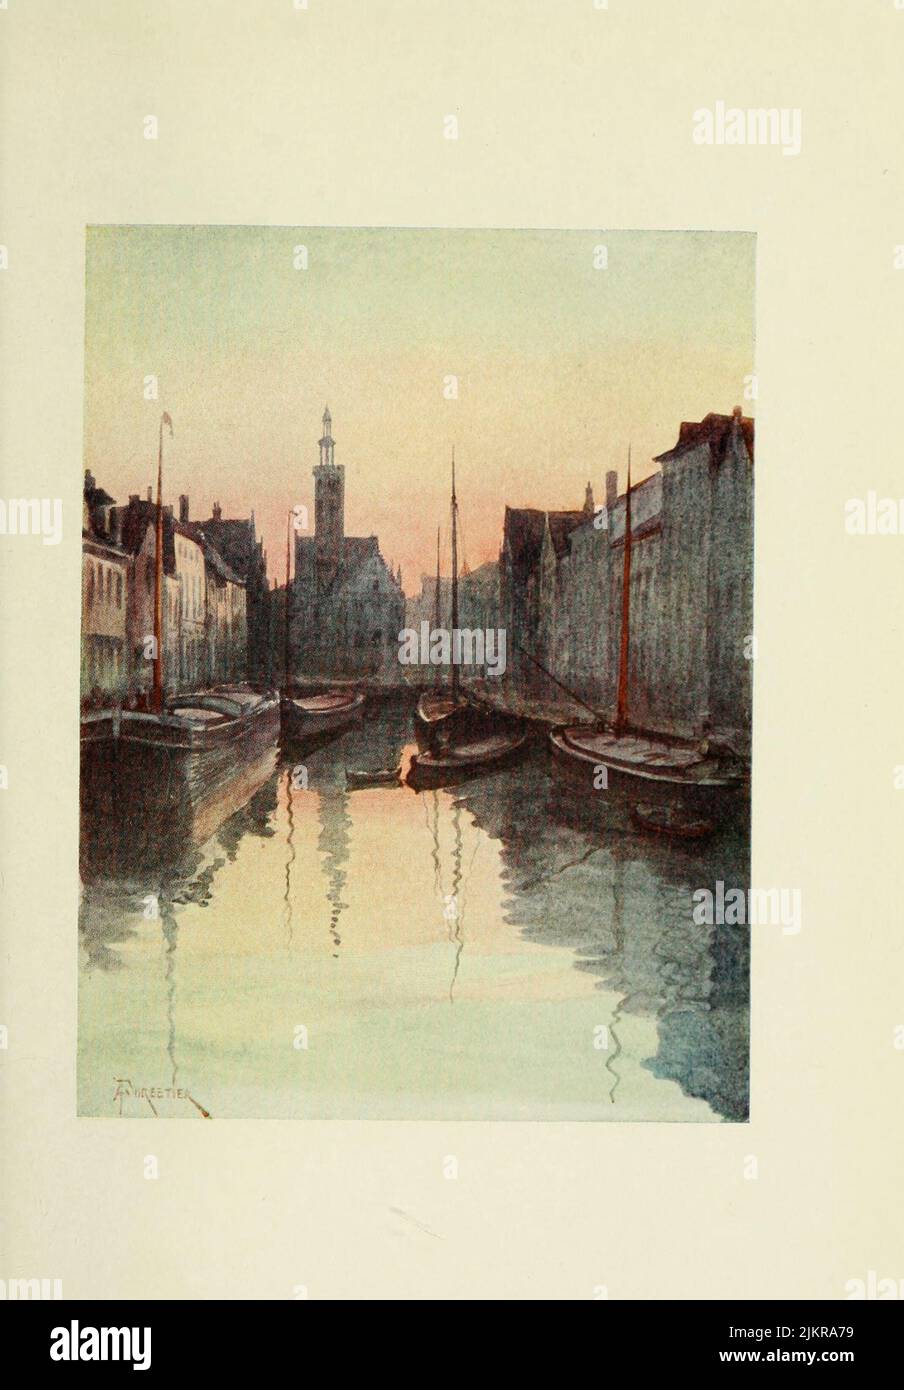 Bruges: Quai du Miroir Painted by Amedee Forestier, from the book '  Bruges and West Flanders ' by George William Thomson Omond, Publication date 1906 Publisher London : A. & C. Black Sir Amédée Forestier (Paris 1854 – 18 November 1930 London) was an Anglo-French artist and illustrator who specialised in historical and prehistoric scenes, and landscapes. Stock Photo